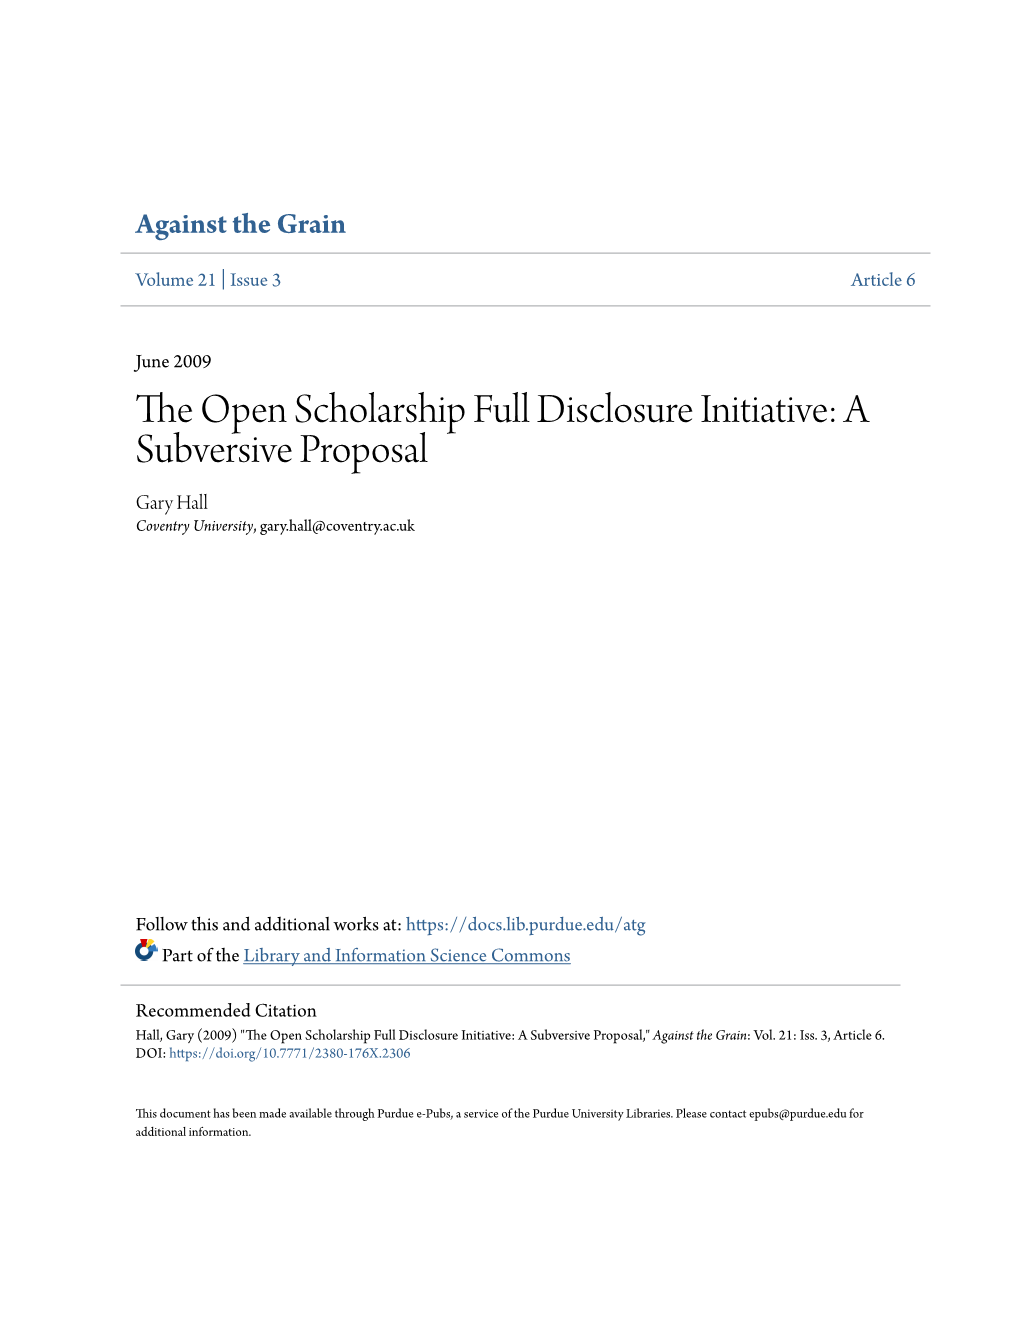 The Open Scholarship Full Disclosure Initiative: a Subversive Proposal Gary Hall Coventry University, Gary.Hall@Coventry.Ac.Uk